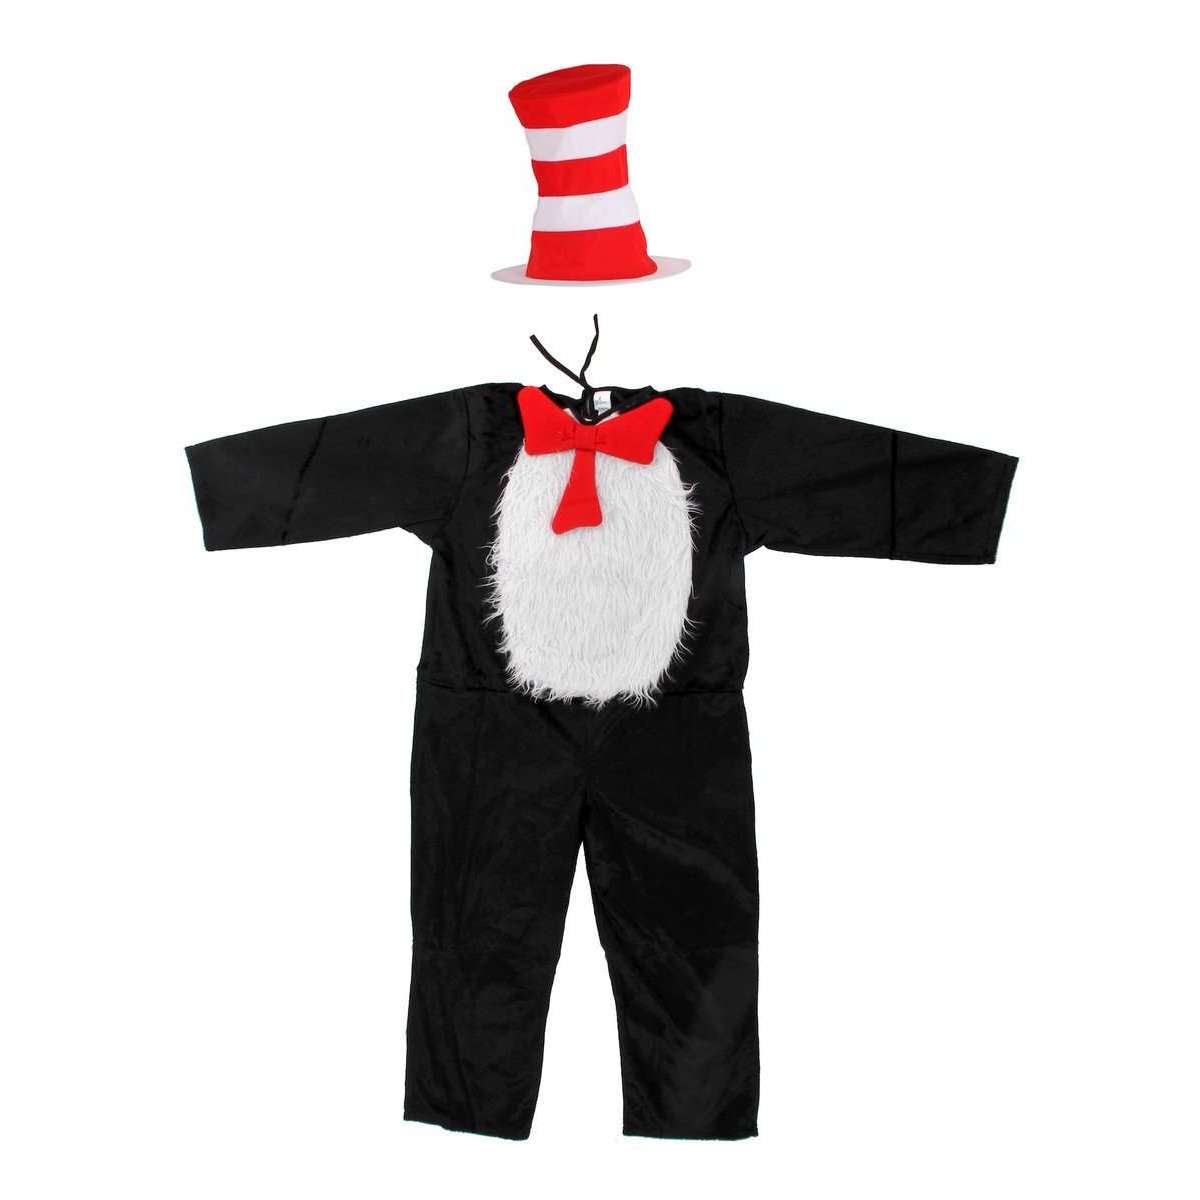 Dr Seuss Deluxe Cat in the Hat Childs Costume Kit